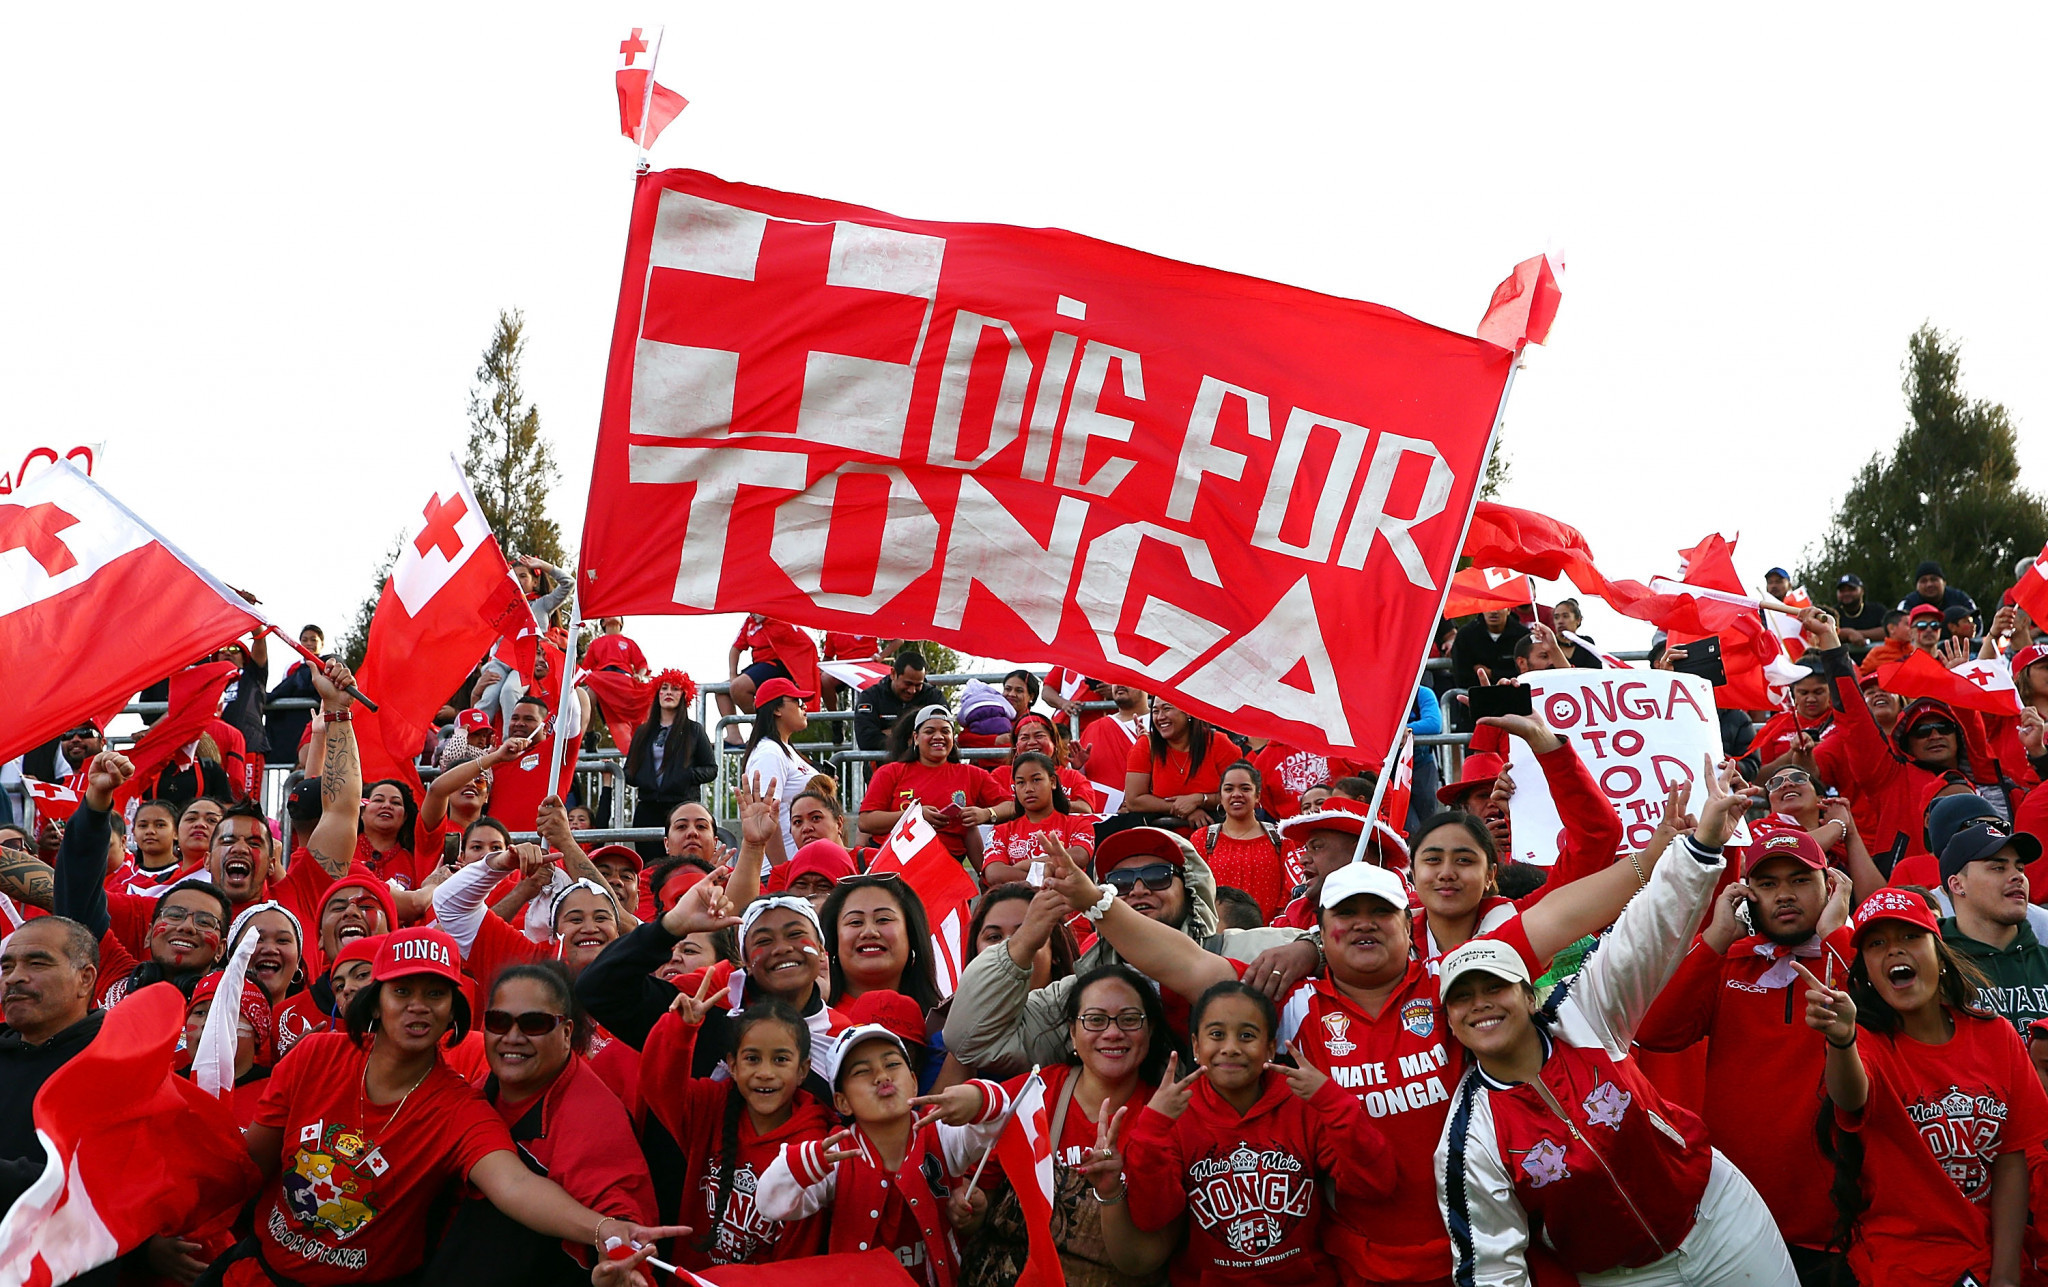 Tonga stunned New Zealand today at the Rugby League World Cup ©Getty Images